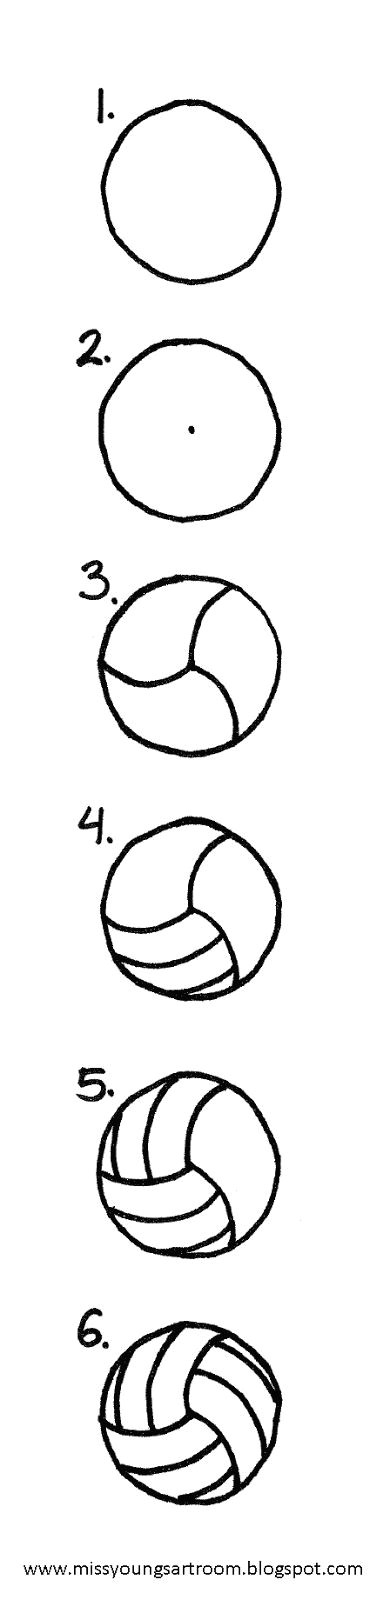 Easy Volleyball Drawings 62 Best Volleyball Images On Pinterest Volleyball Ideas